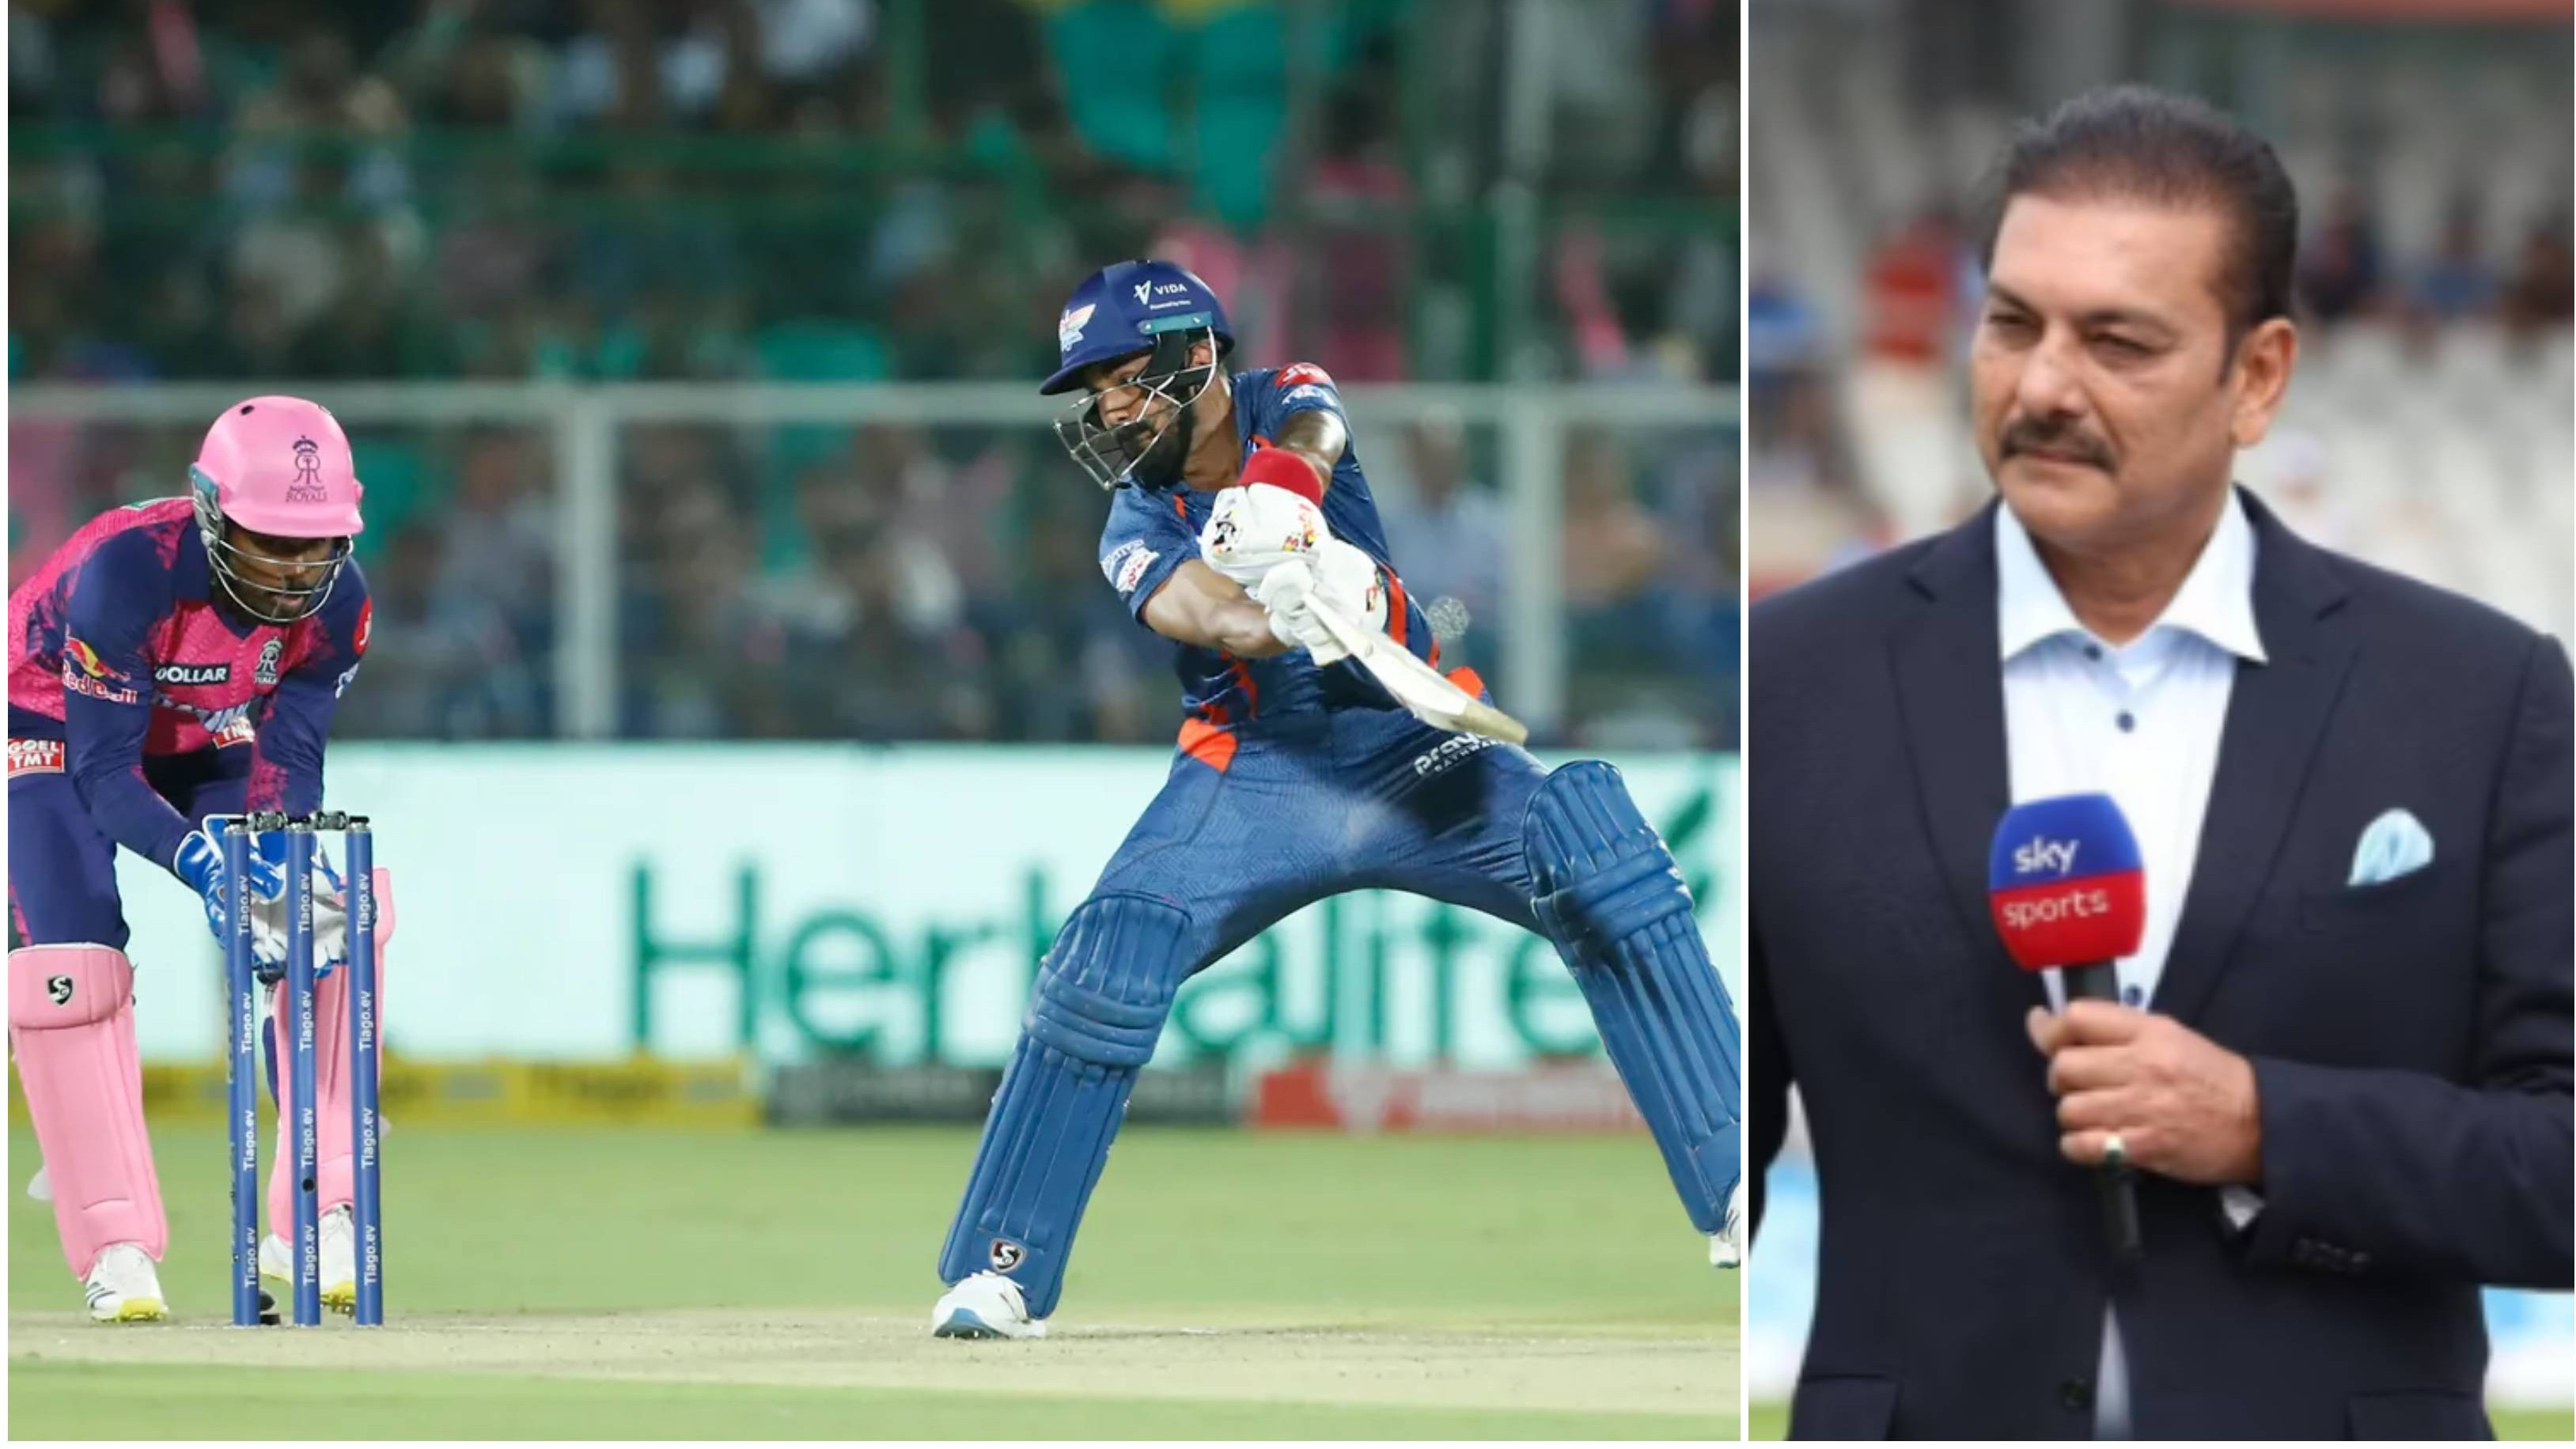 IPL 2023: “I don't buy it,” Ravi Shastri disagrees with KL Rahul’s reasoning of slow batting approach against RR